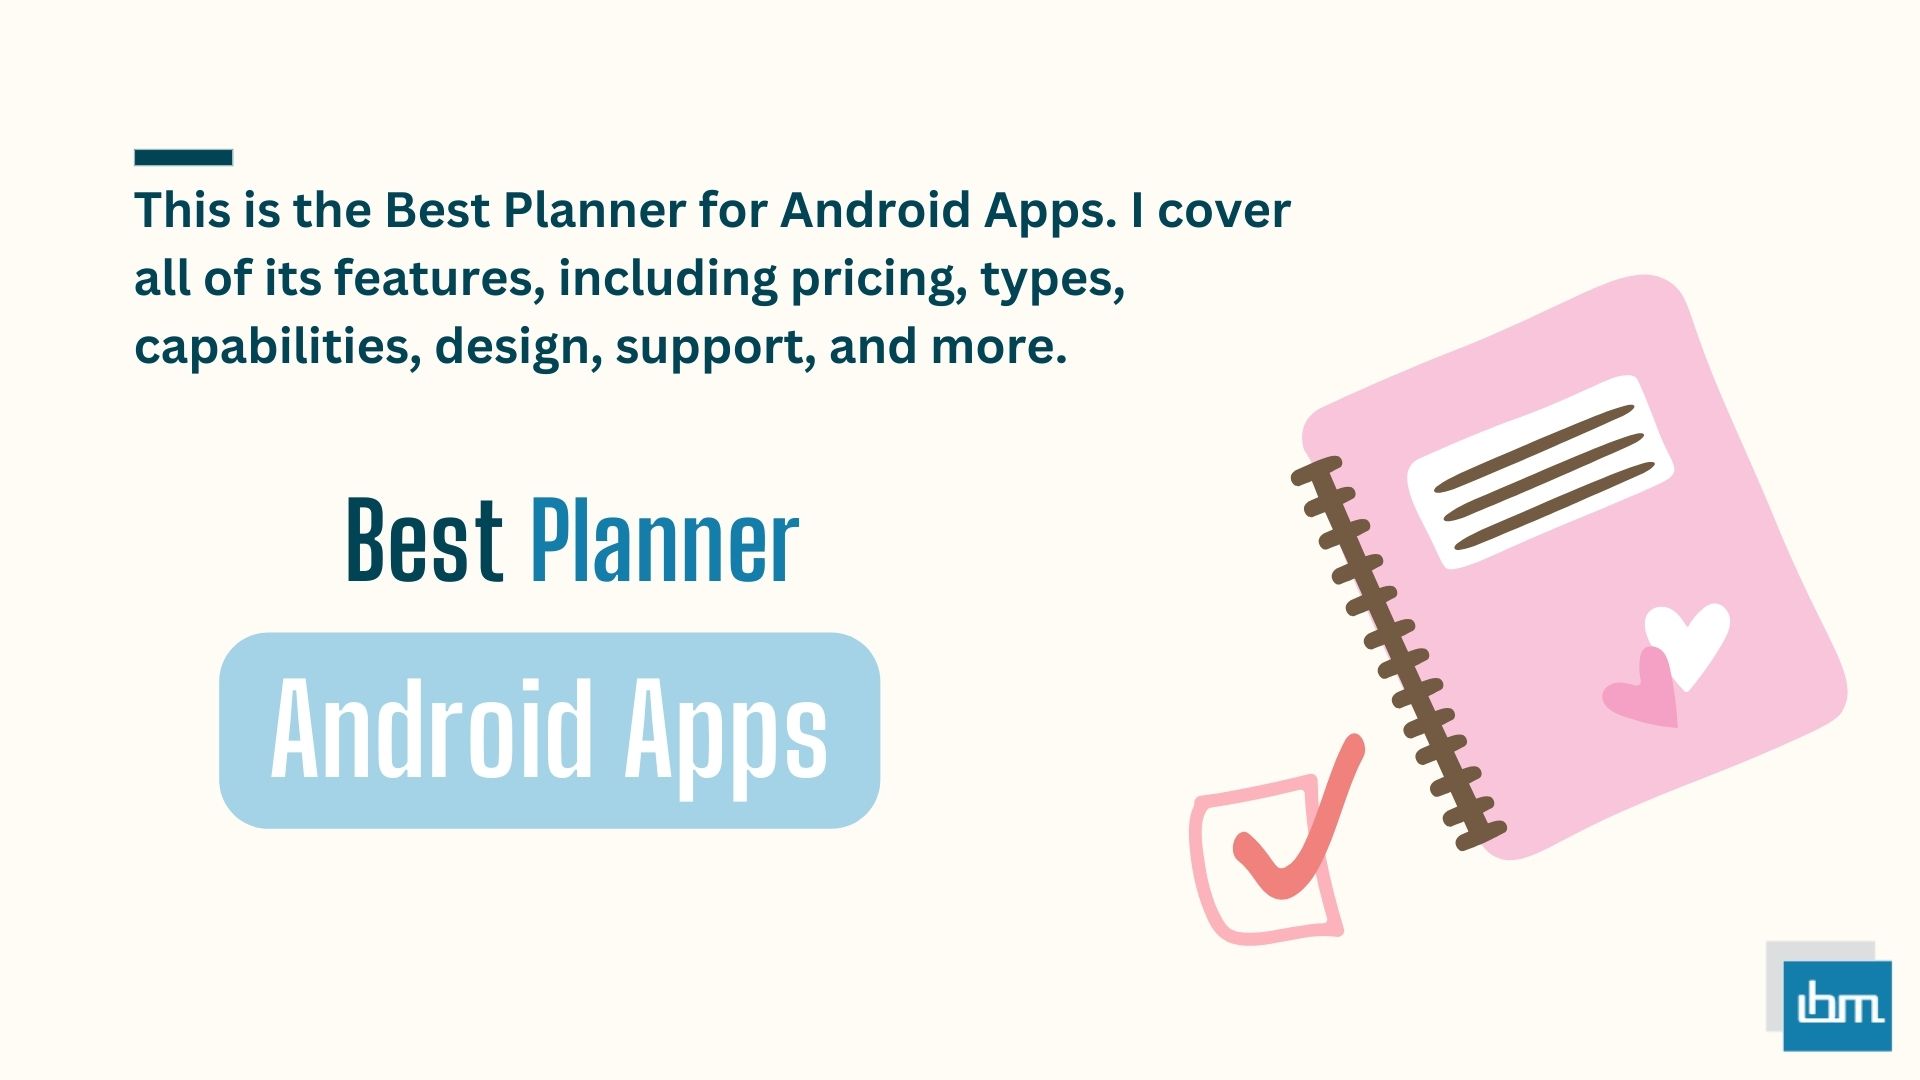 Best Planner for Android Apps